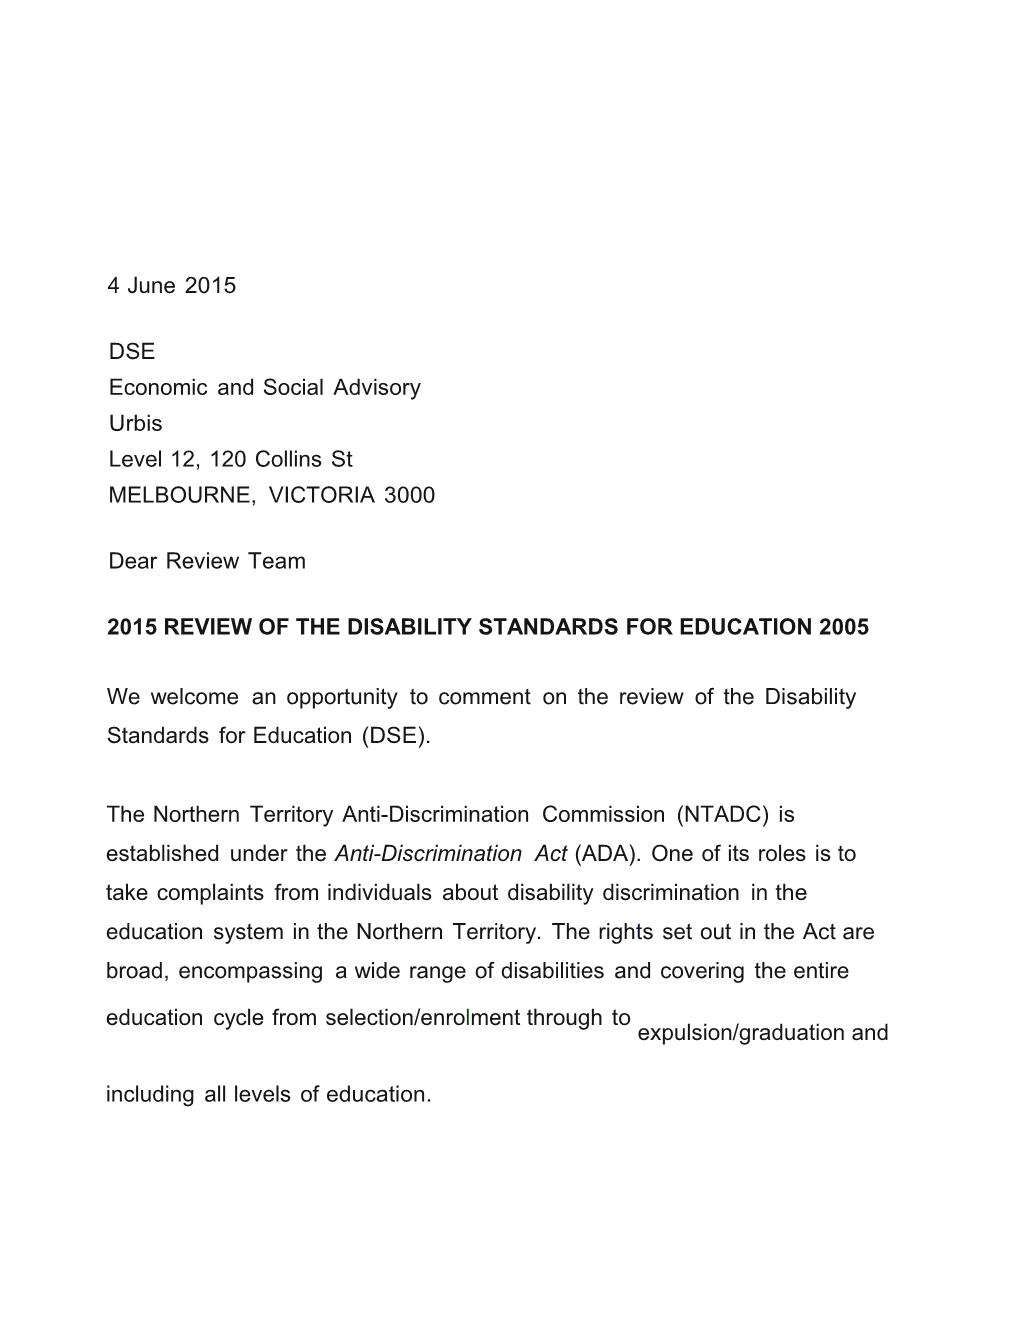 2015 Review of the Disability Standards for Education2005